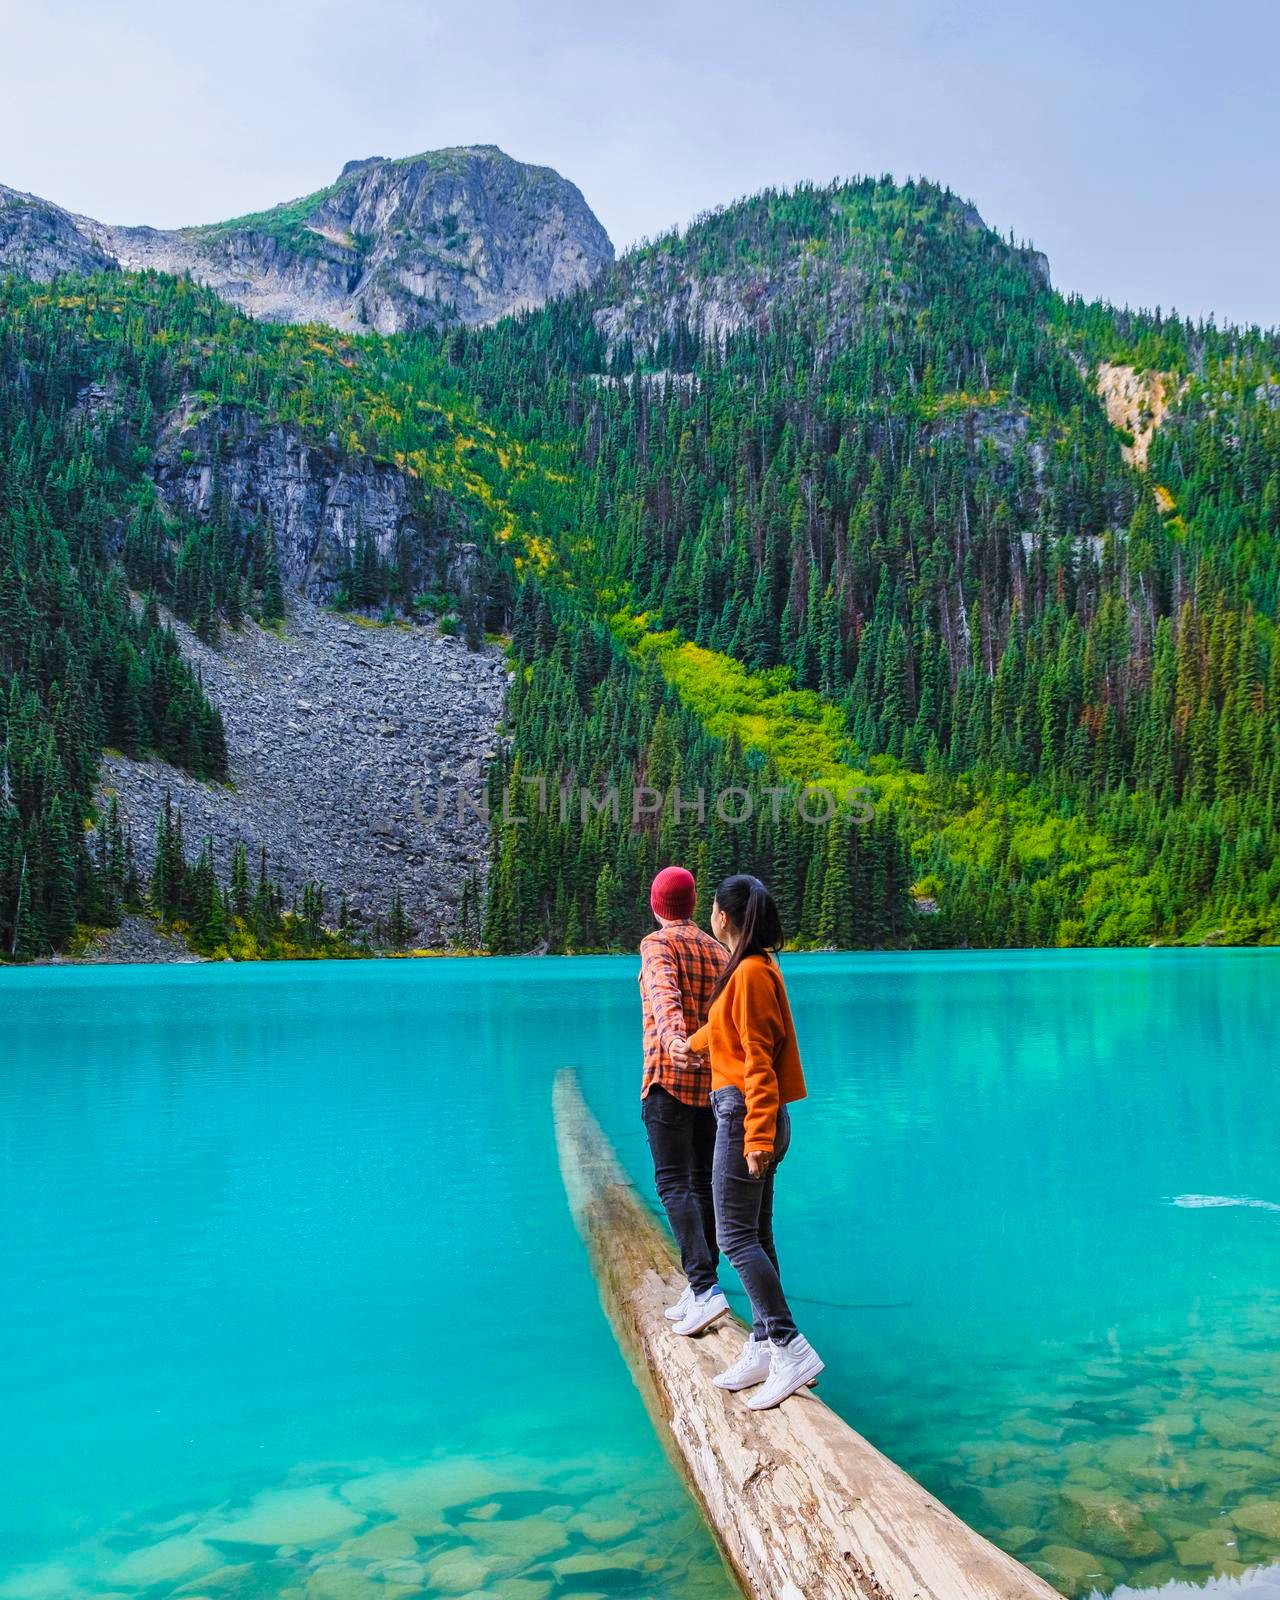 Joffre Lakes British Colombia Whistler Canada, colorful Joffre lakes national park in Canada by fokkebok